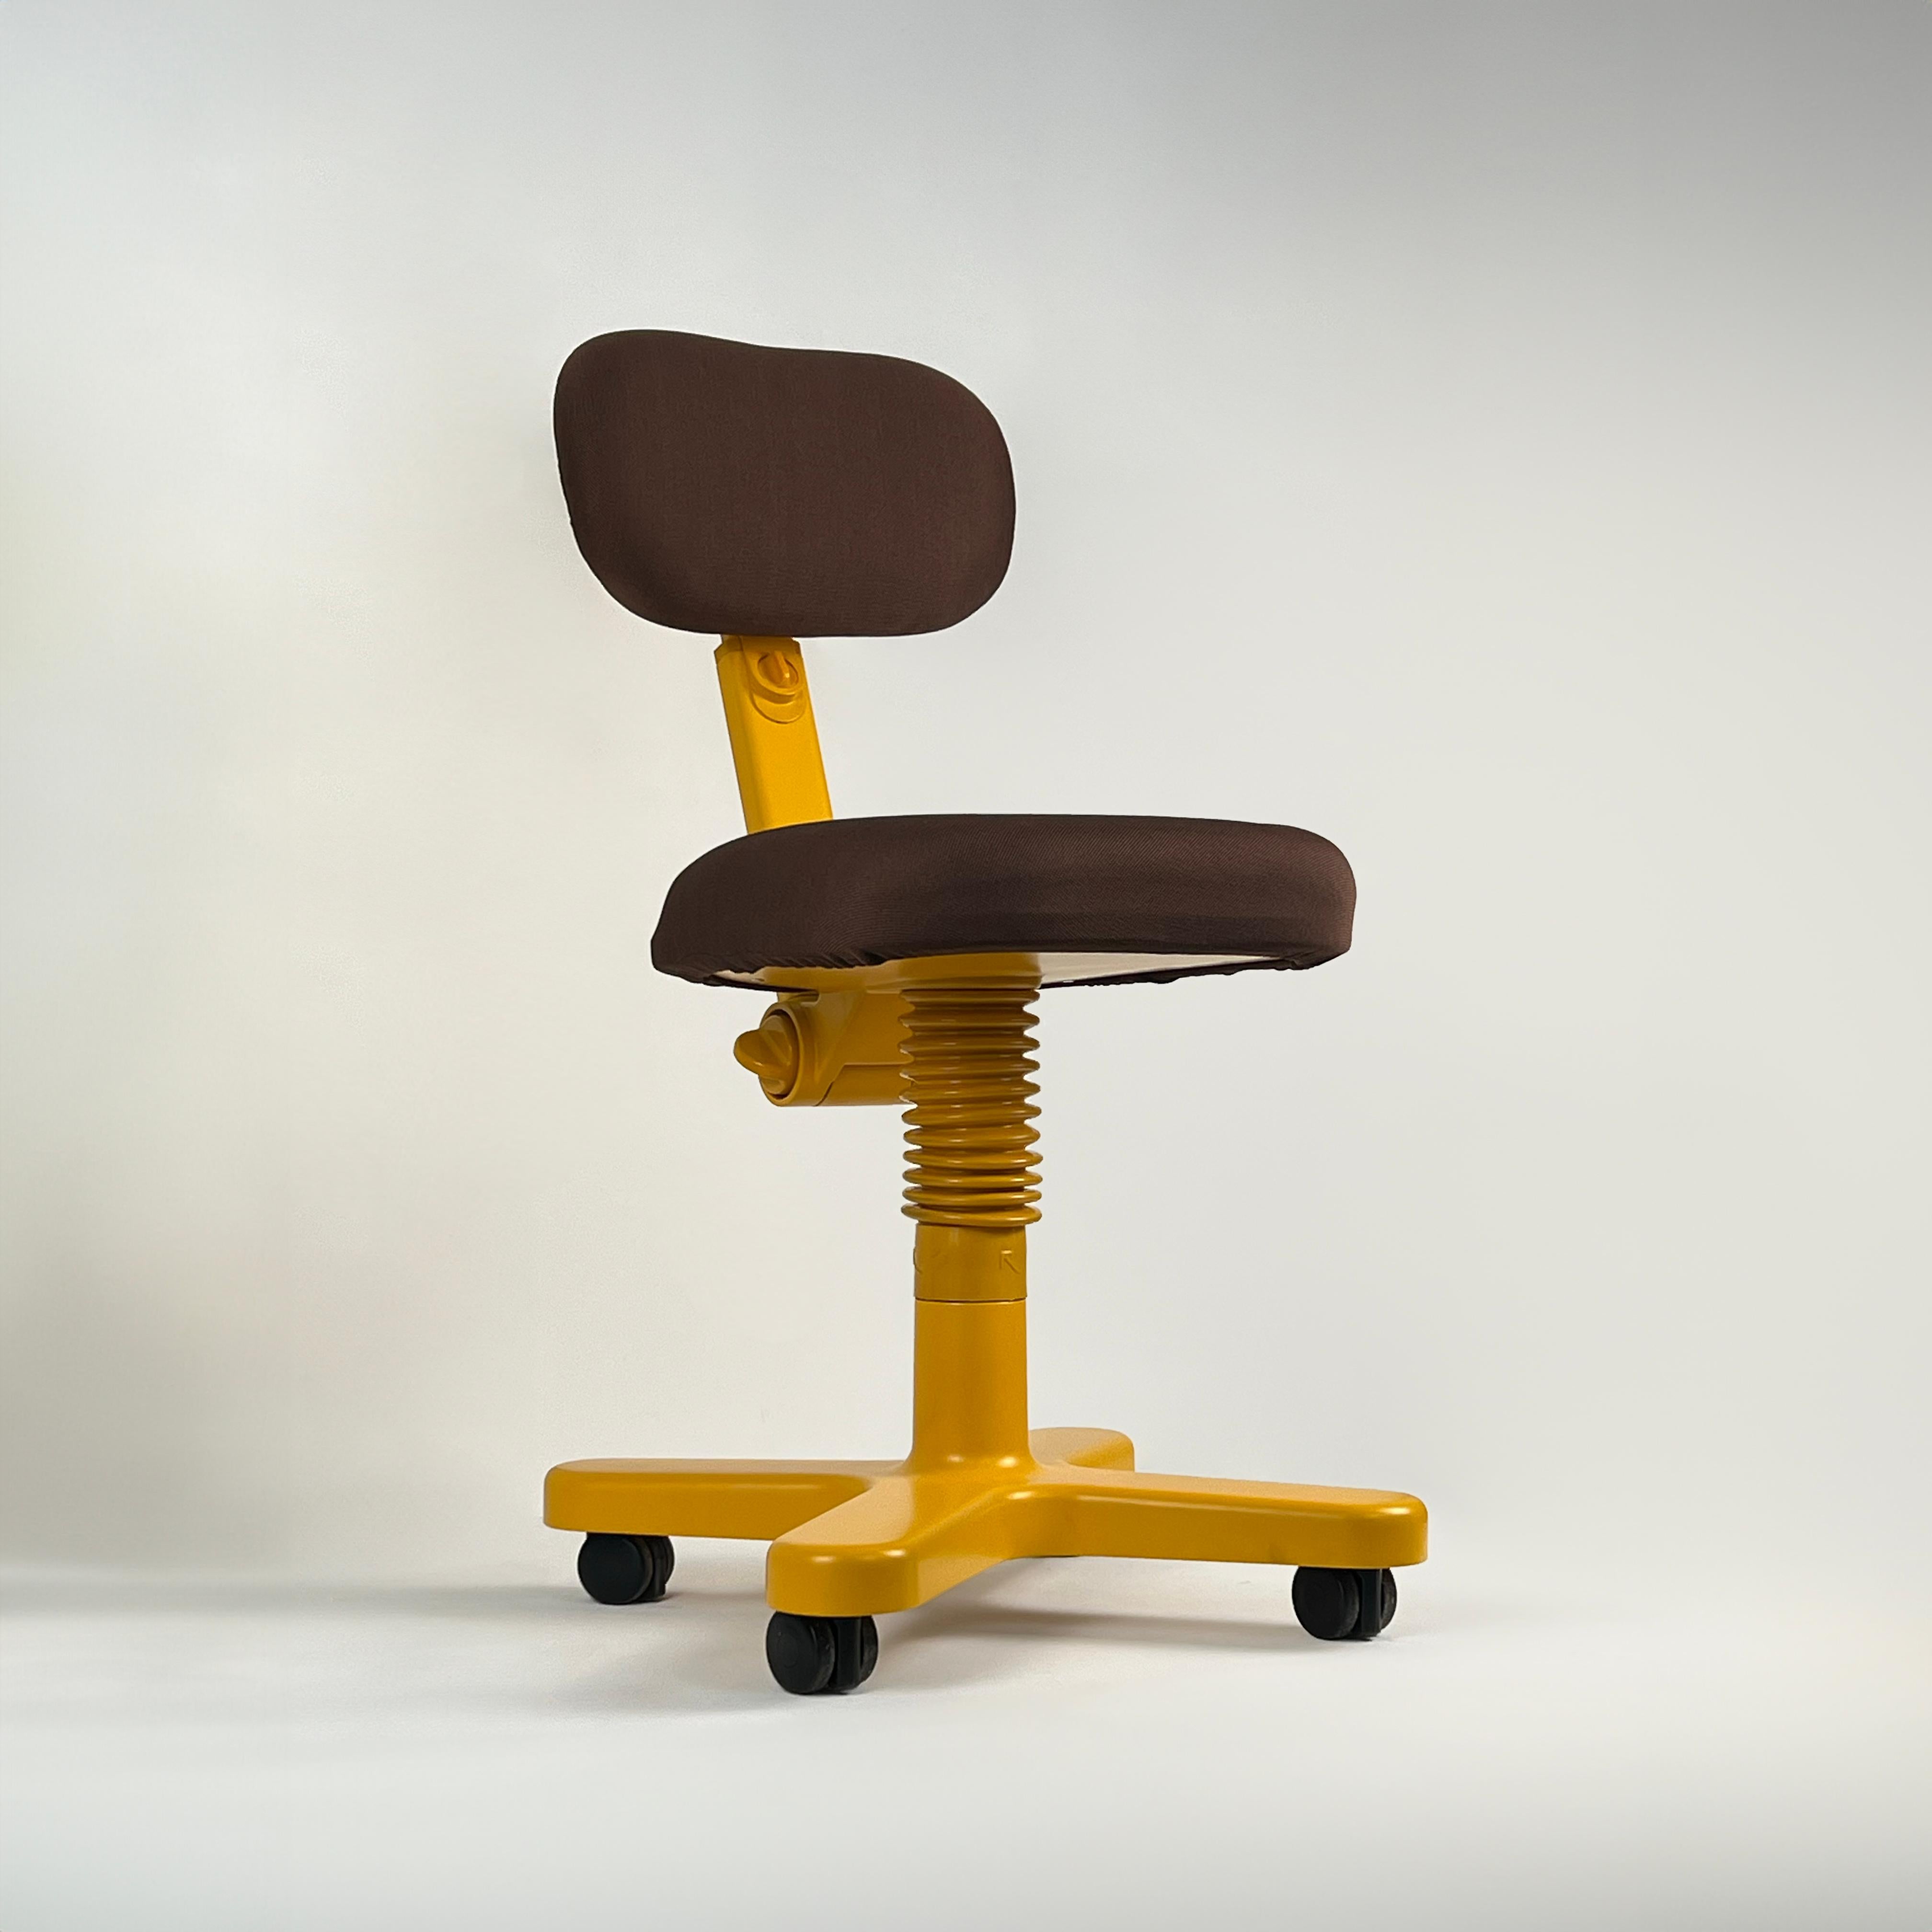  Desk Chair Mod.Synthesis 45 Designed by Ettore Sottsass for Olivetti, Italy 197 For Sale 7